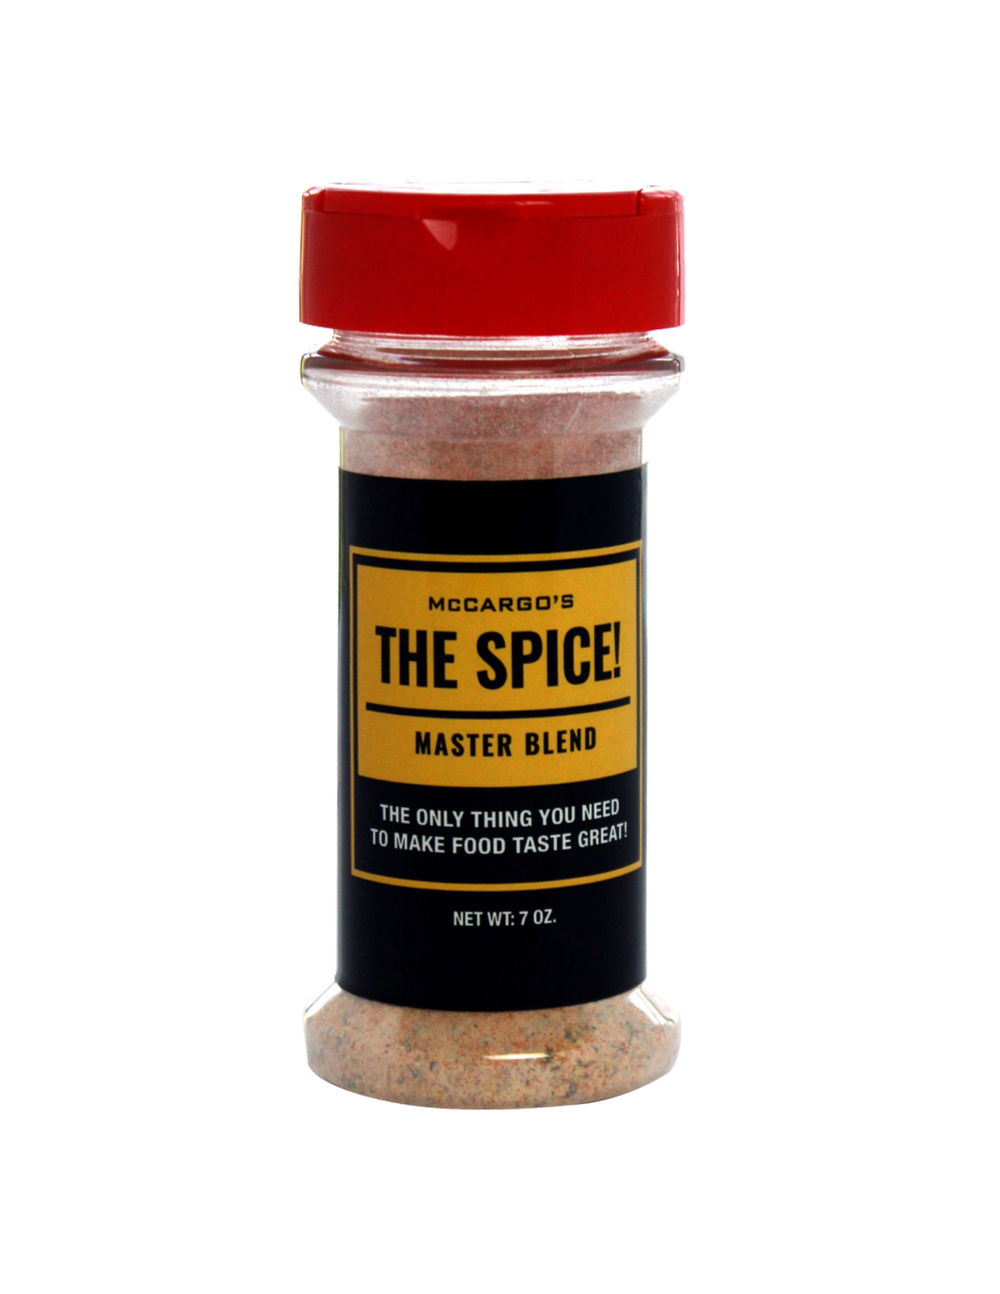 THE SPICE! MASTER BLEND — Chef Aaron McCargo